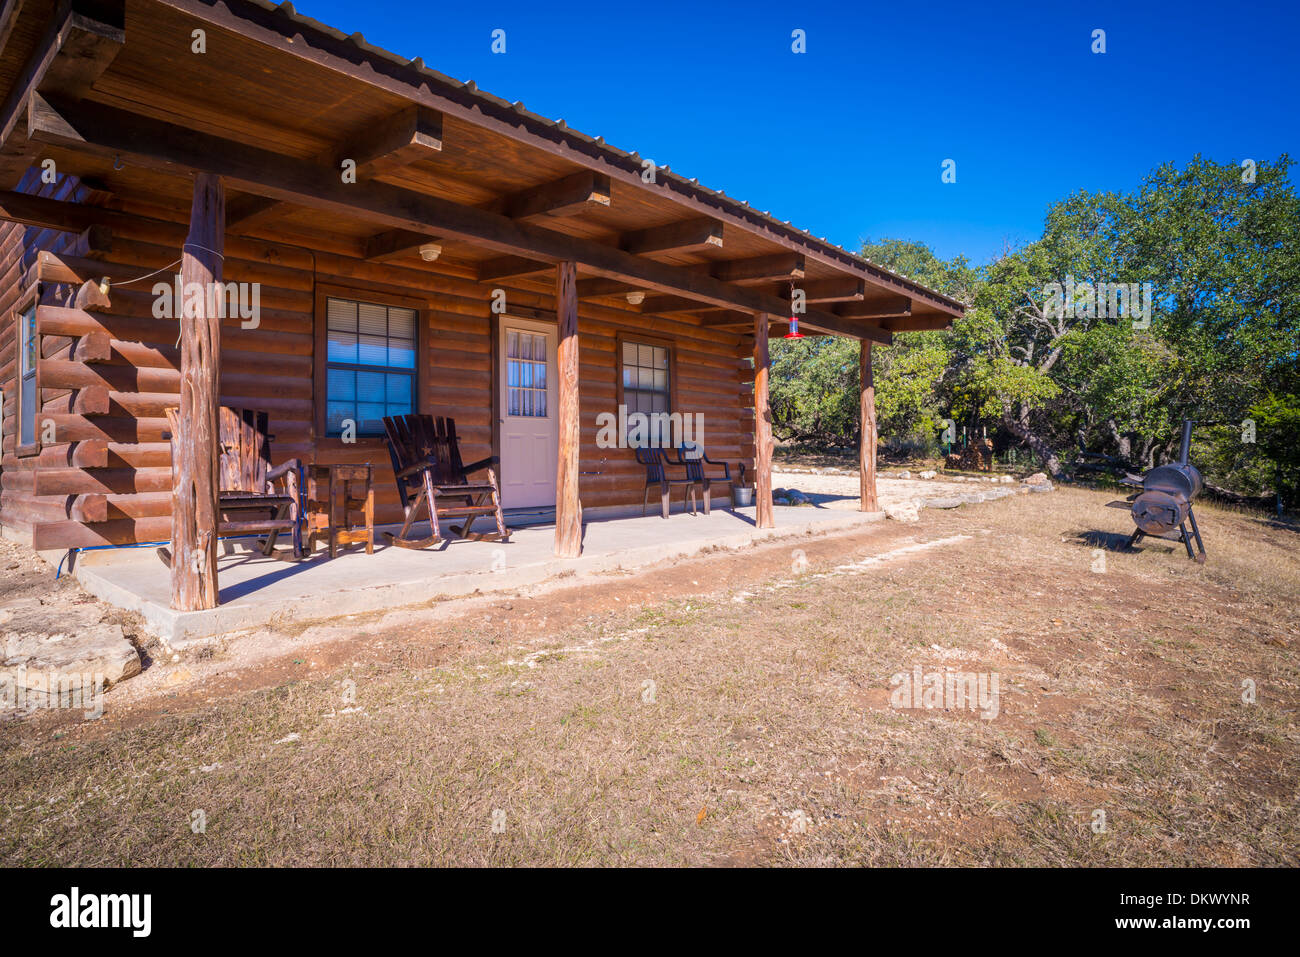 Exterior of rustic farm log house with wooden rocking chairs on the fron deck. Barbecue smoker in the front yard. Texas, USA. Stock Photo